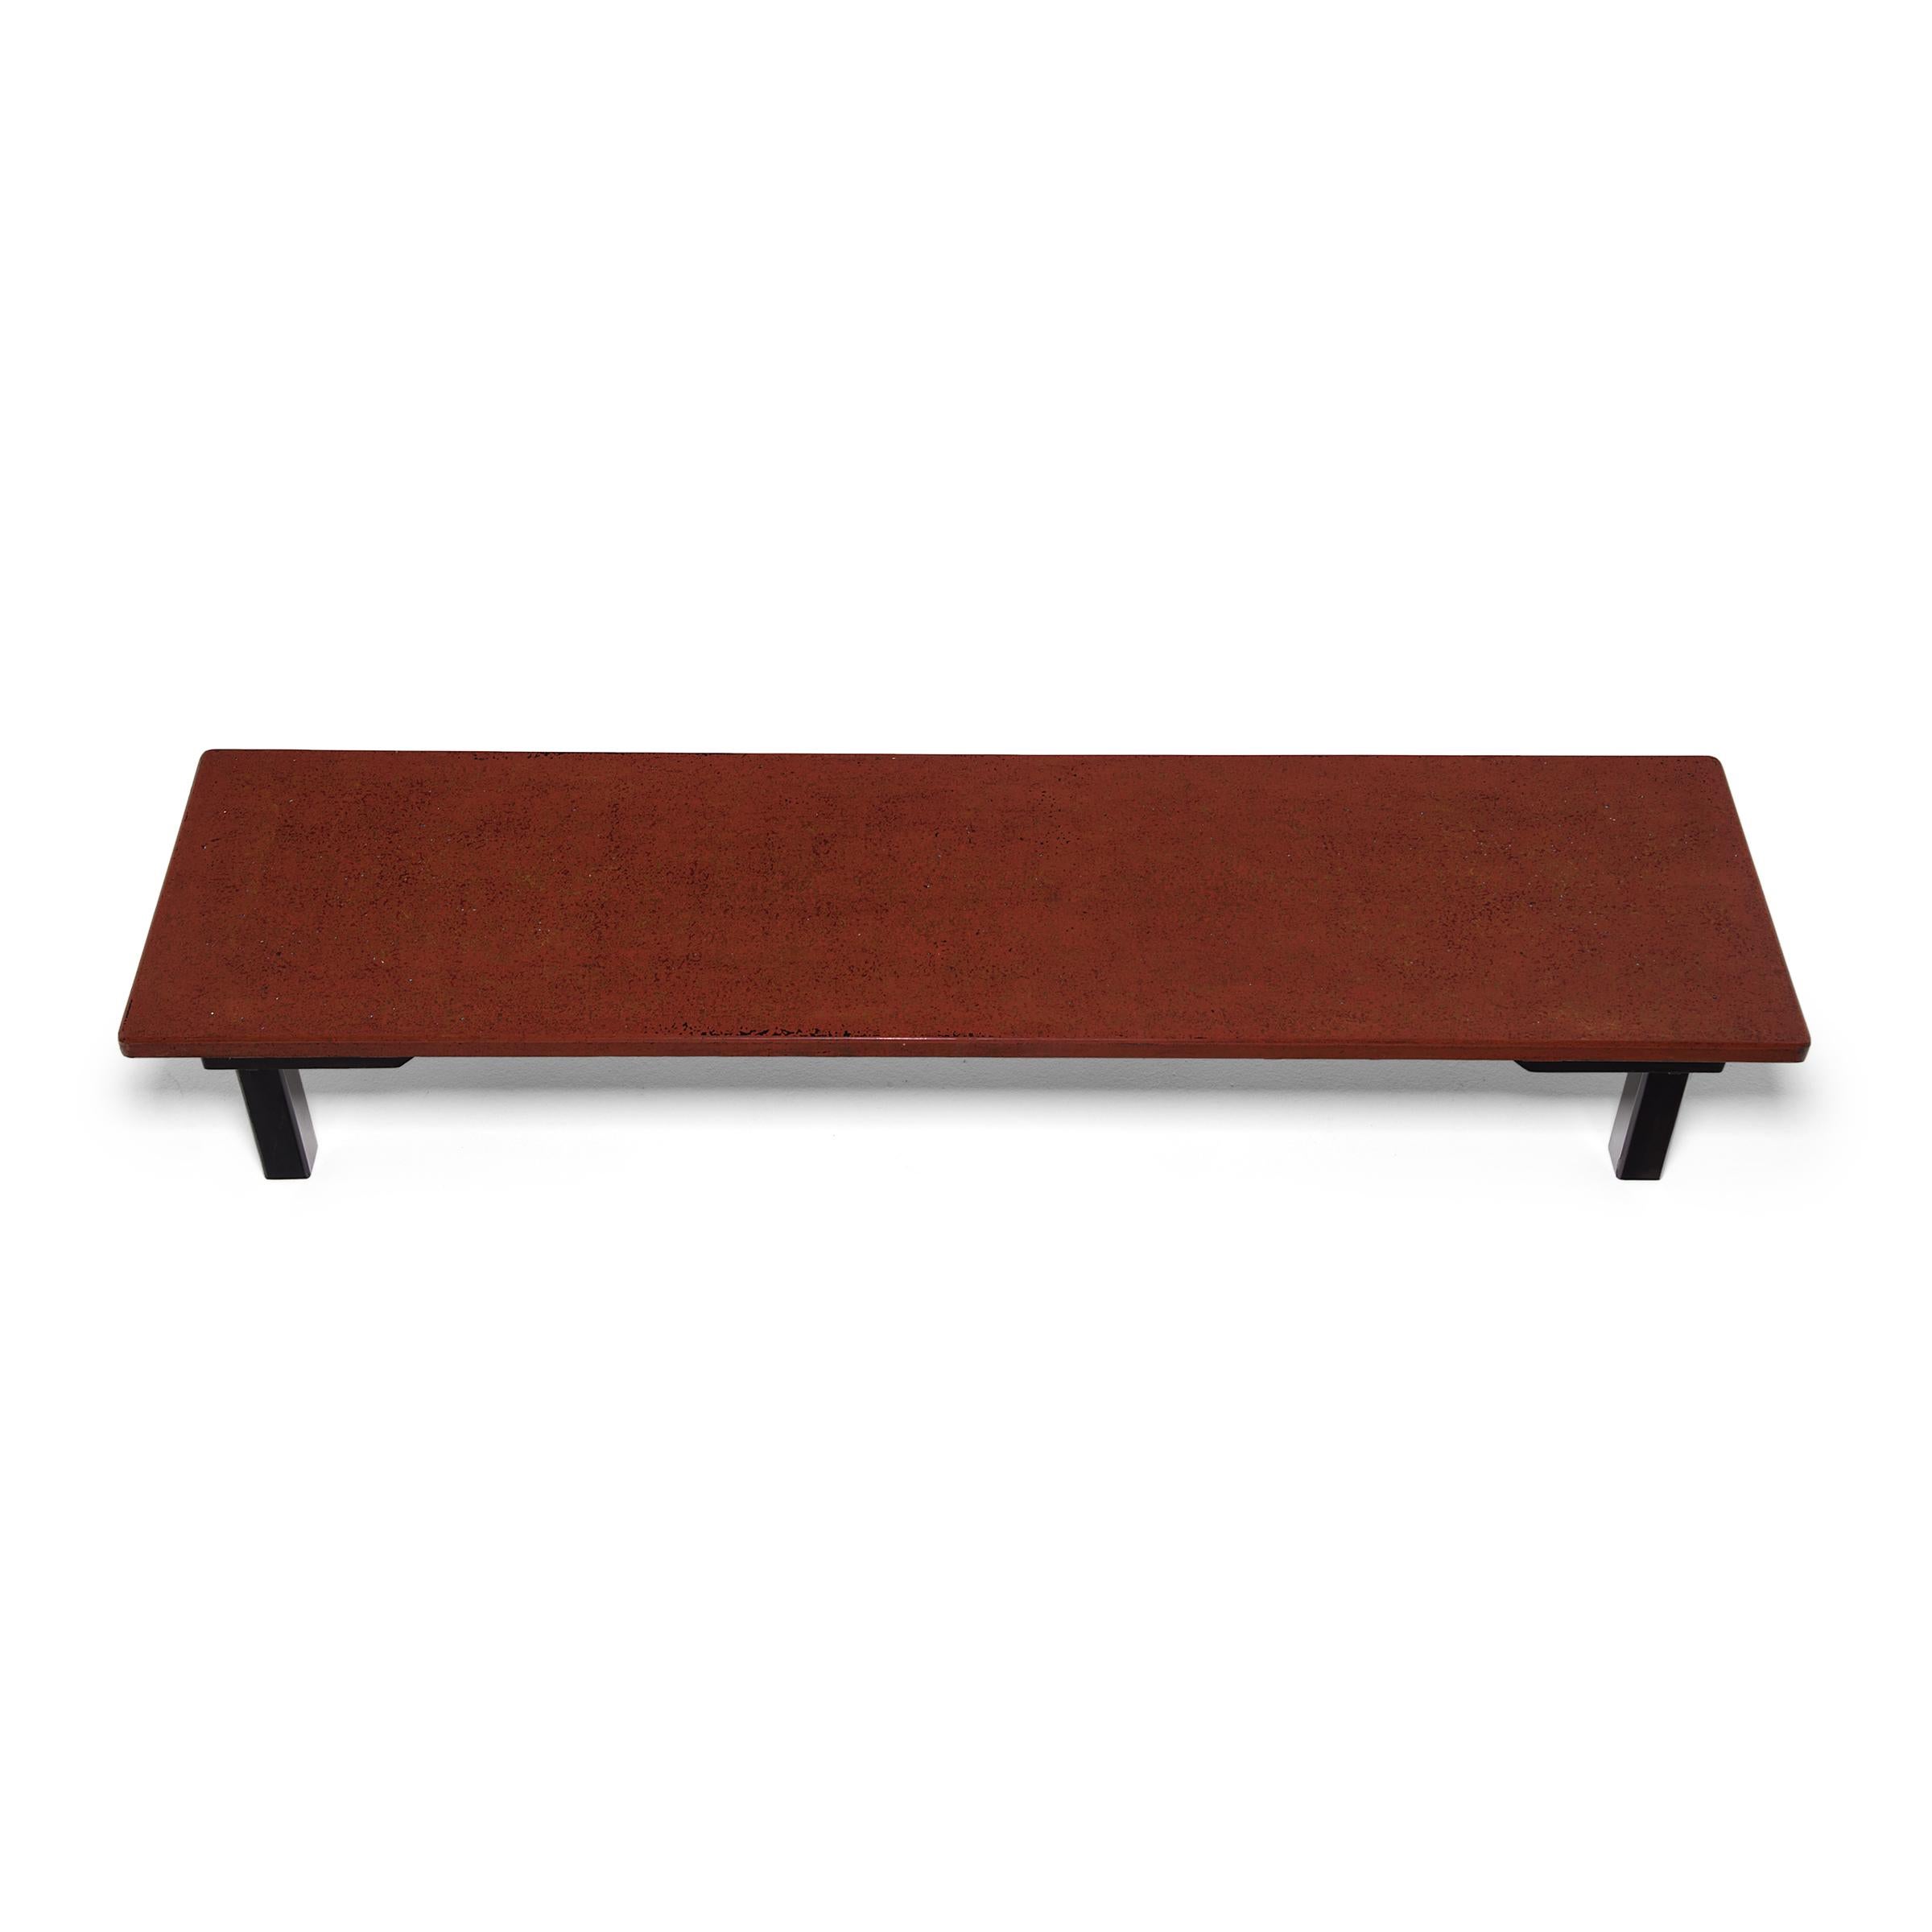 The restrained silhouette of this low Japanese table beautifully showcases the extraordinary patterning of the lacquered table top. In a traditional lacquer technique known as tsugaru-nuri, red lacquer flecked with bits of shell and gold powder was